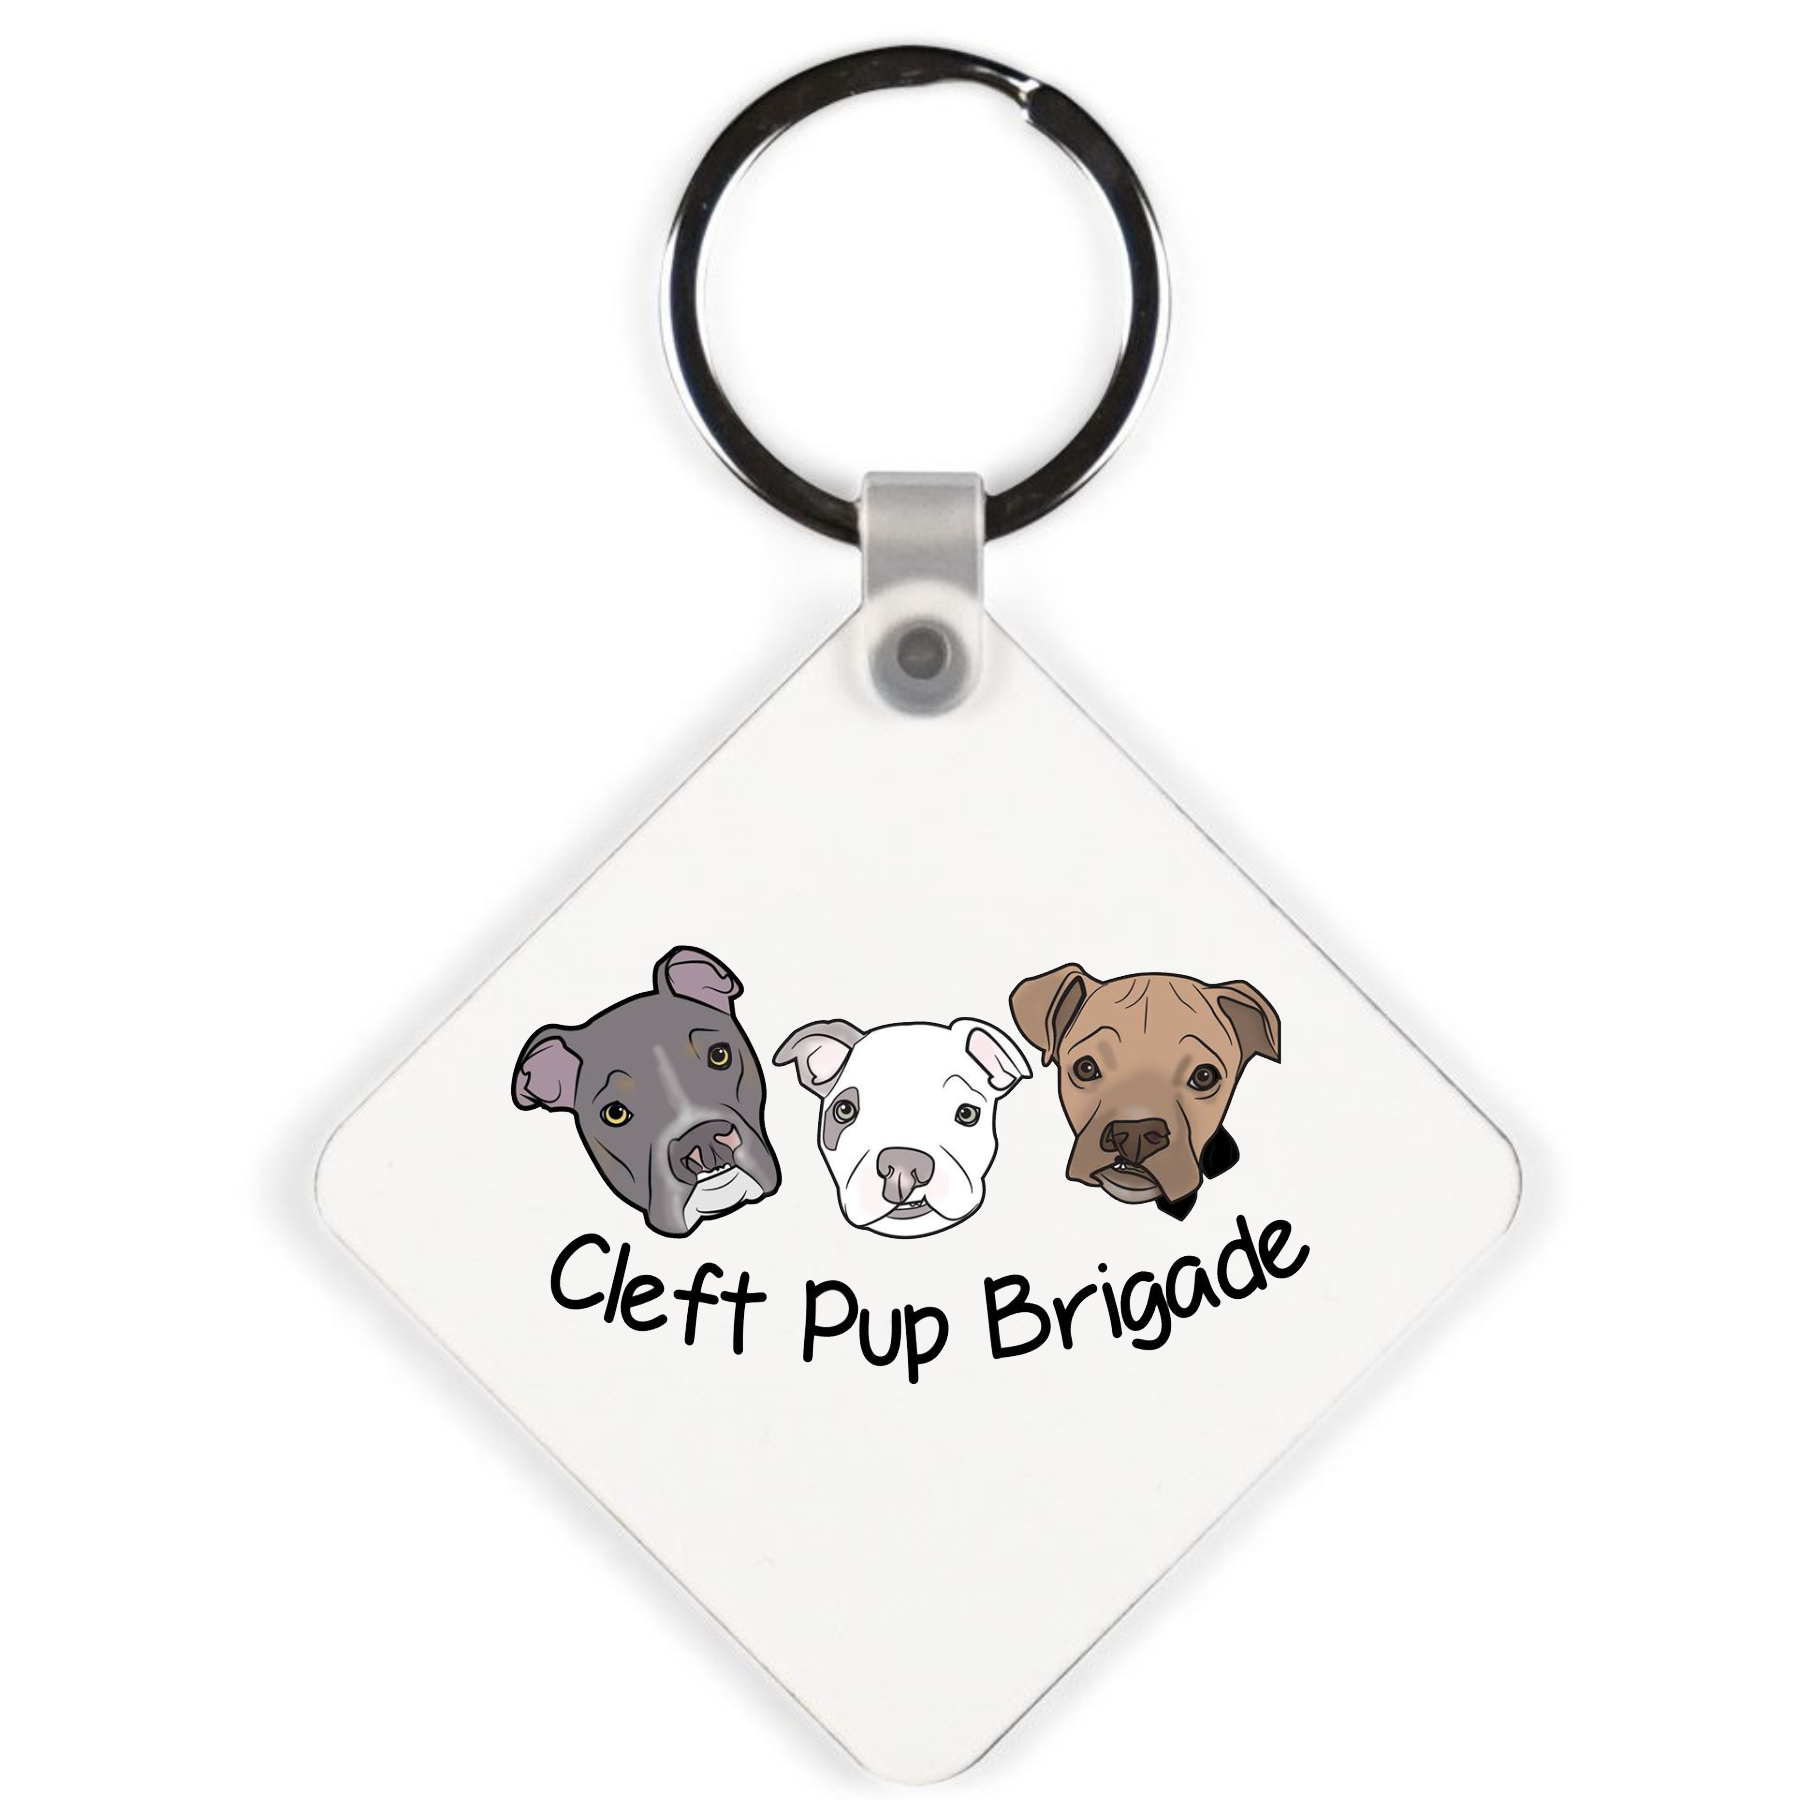 Cleft Pup Brigade Double-Sided Pendants Keychain (Available in several sizes)